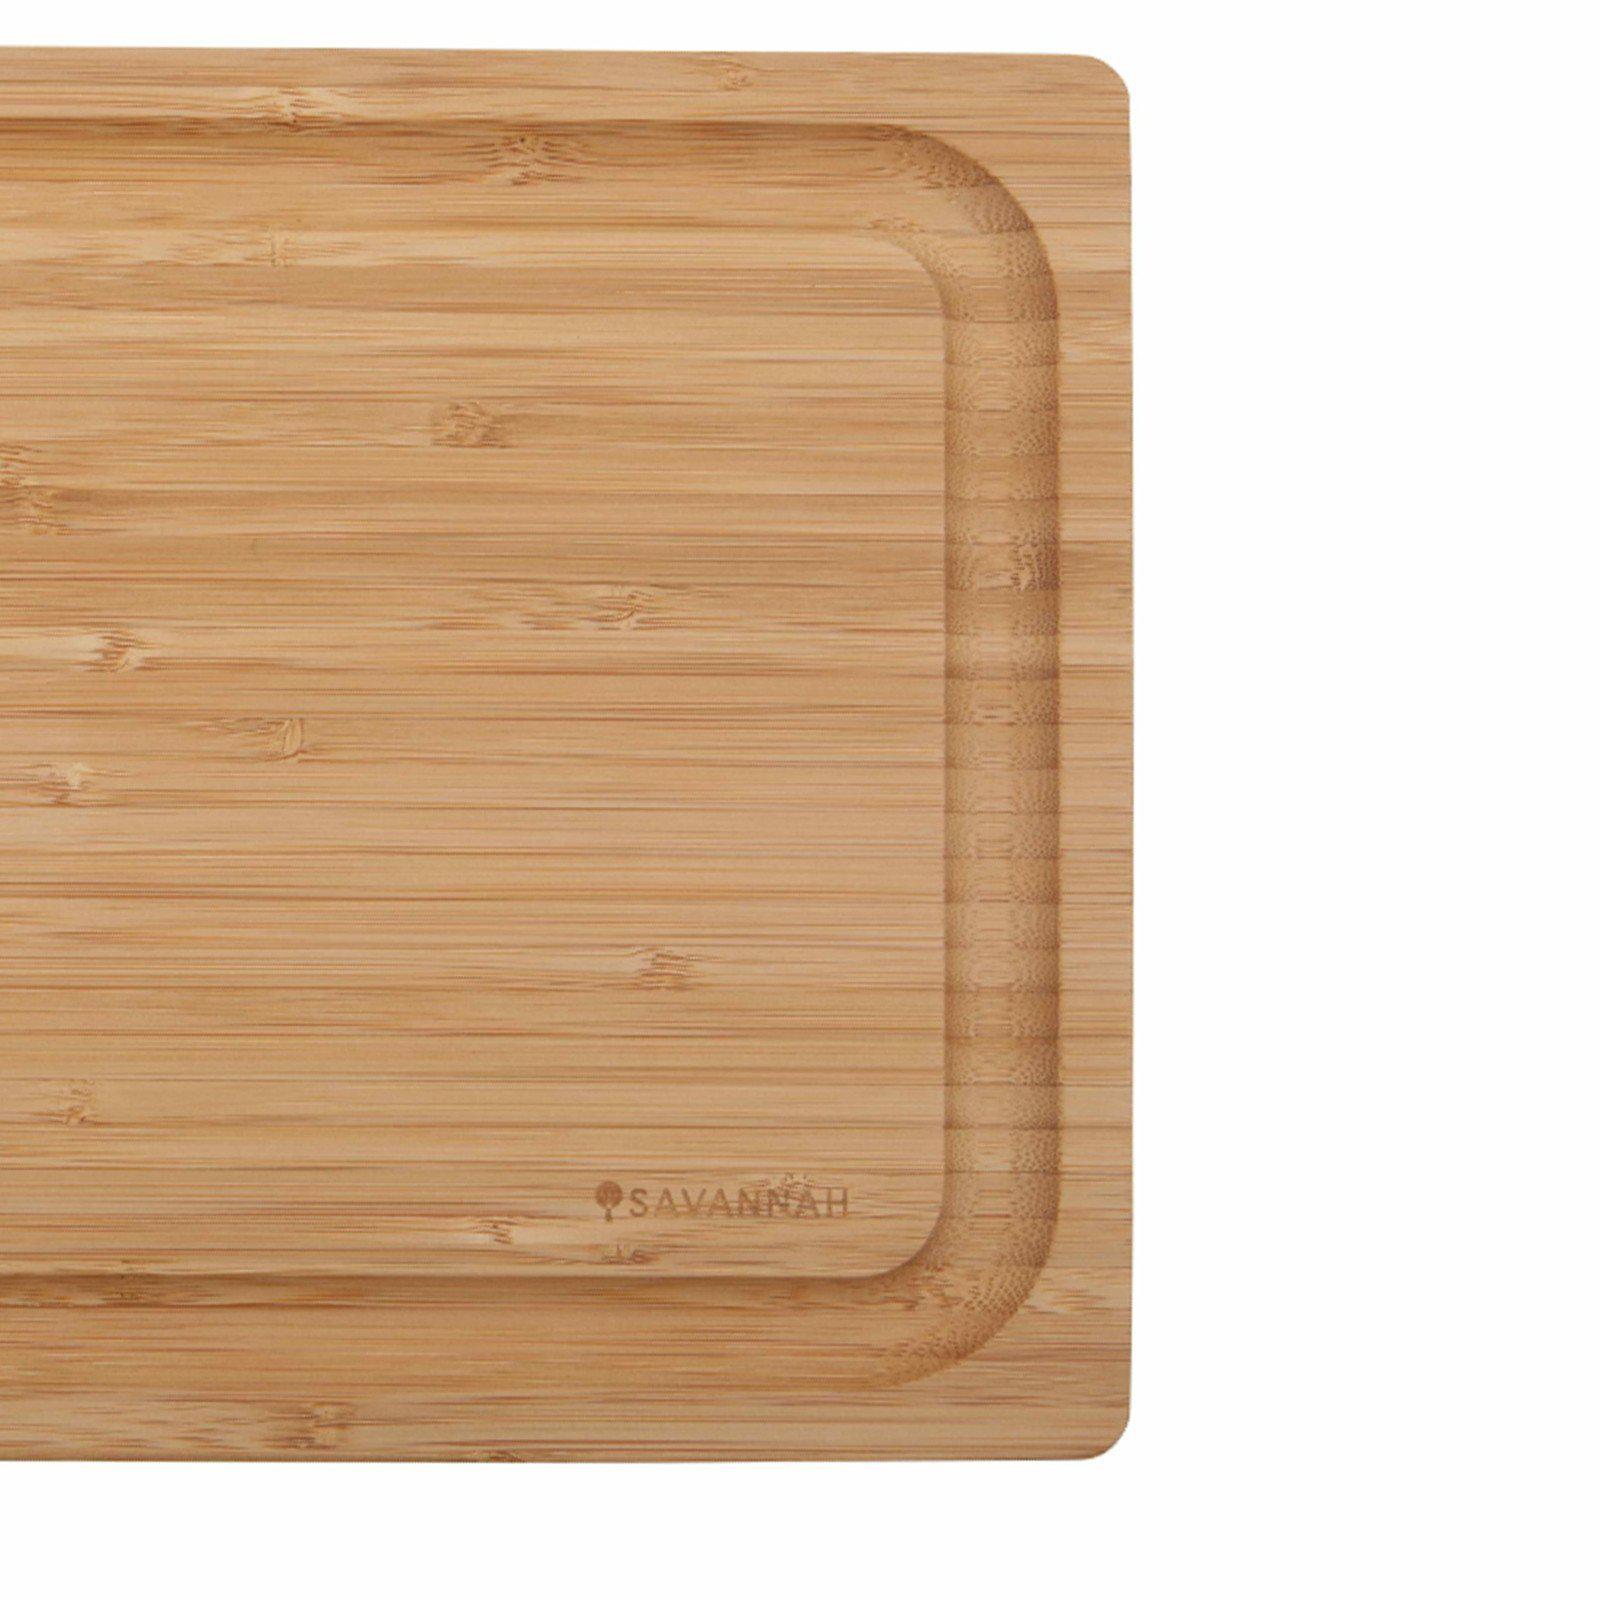 Large Professional Bamboo Cutting Board-cutting board-Chef's Quality Cookware